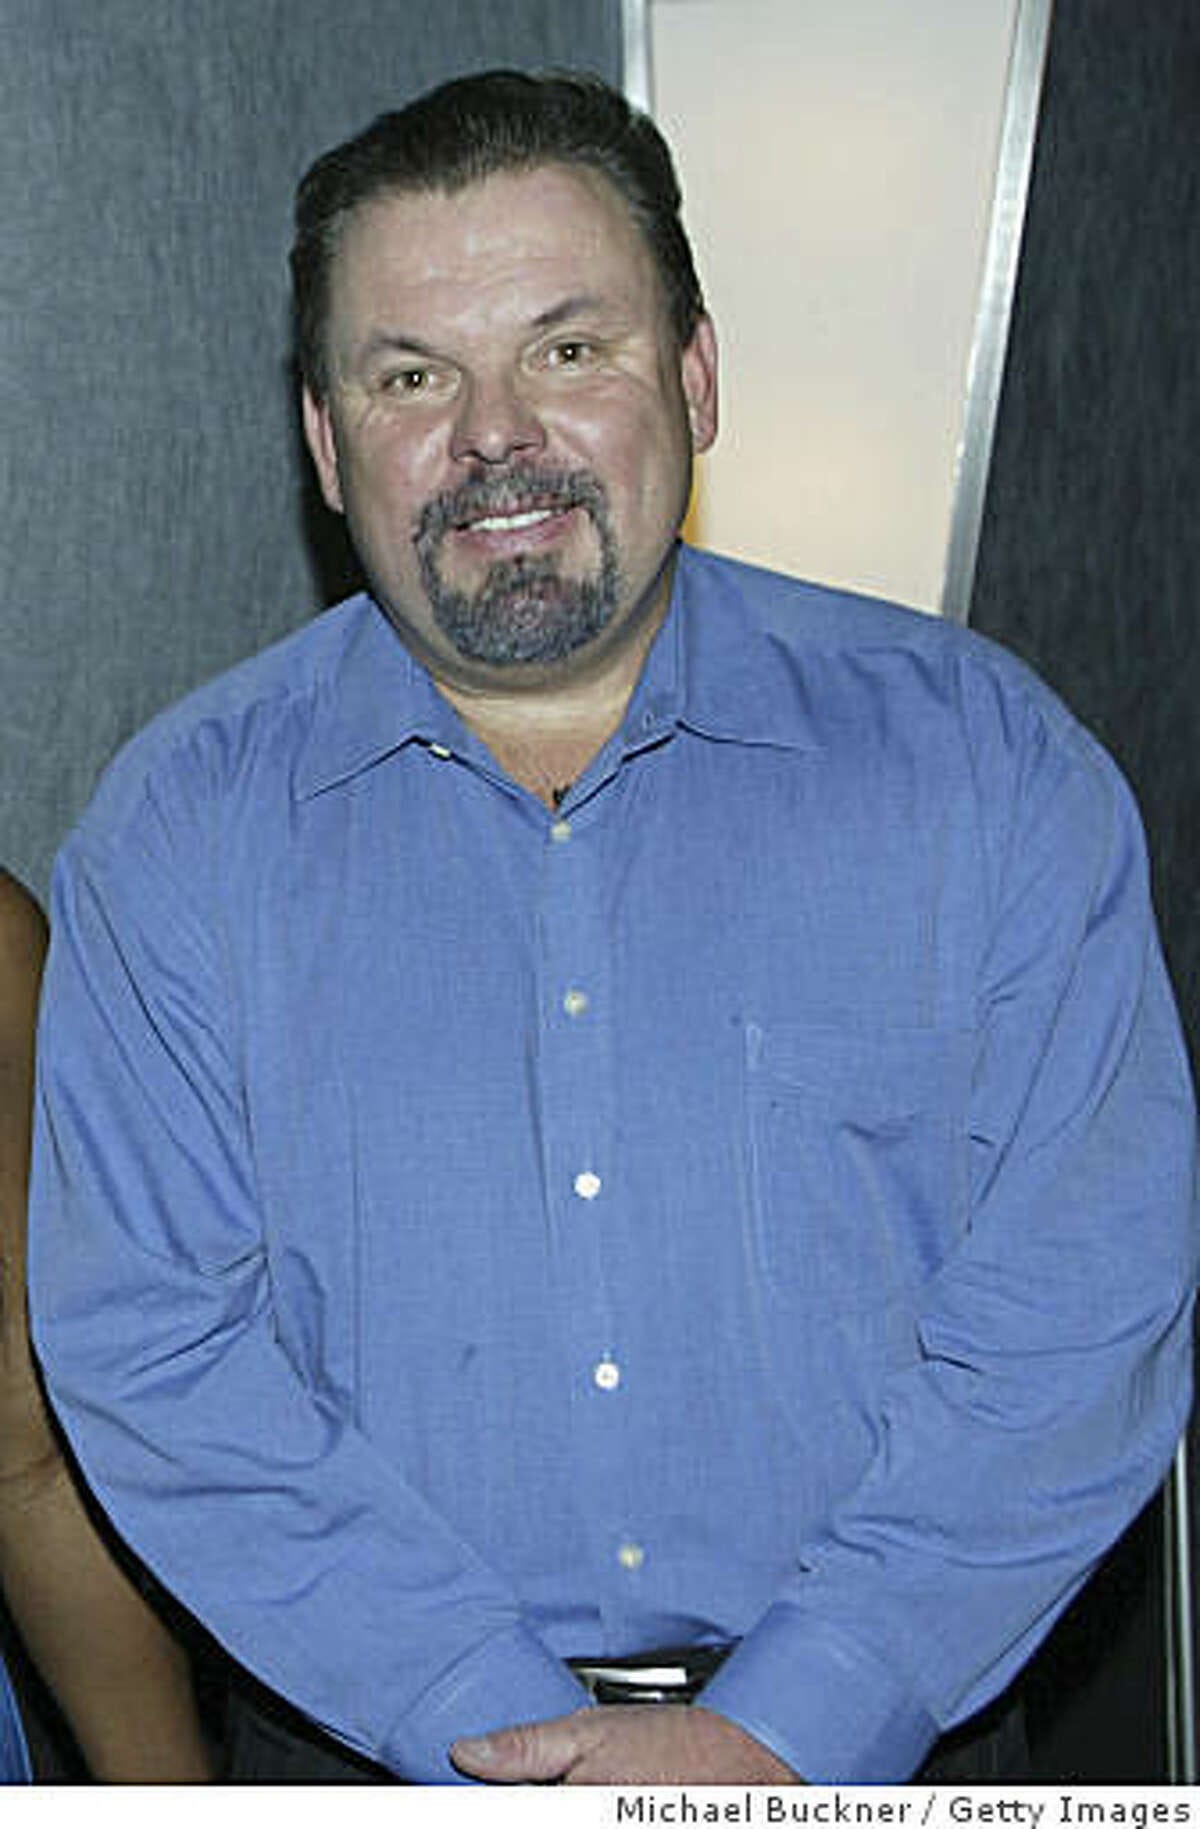 LOS ANGELES - NOVEMBER 22: Painter Thomas Kinkade pose at the "We Are Family" recording session at the Chalice Recording Studios on November 22, 2005 in Los Angeles, California. (Photo by Michael Buckner/Getty Images)